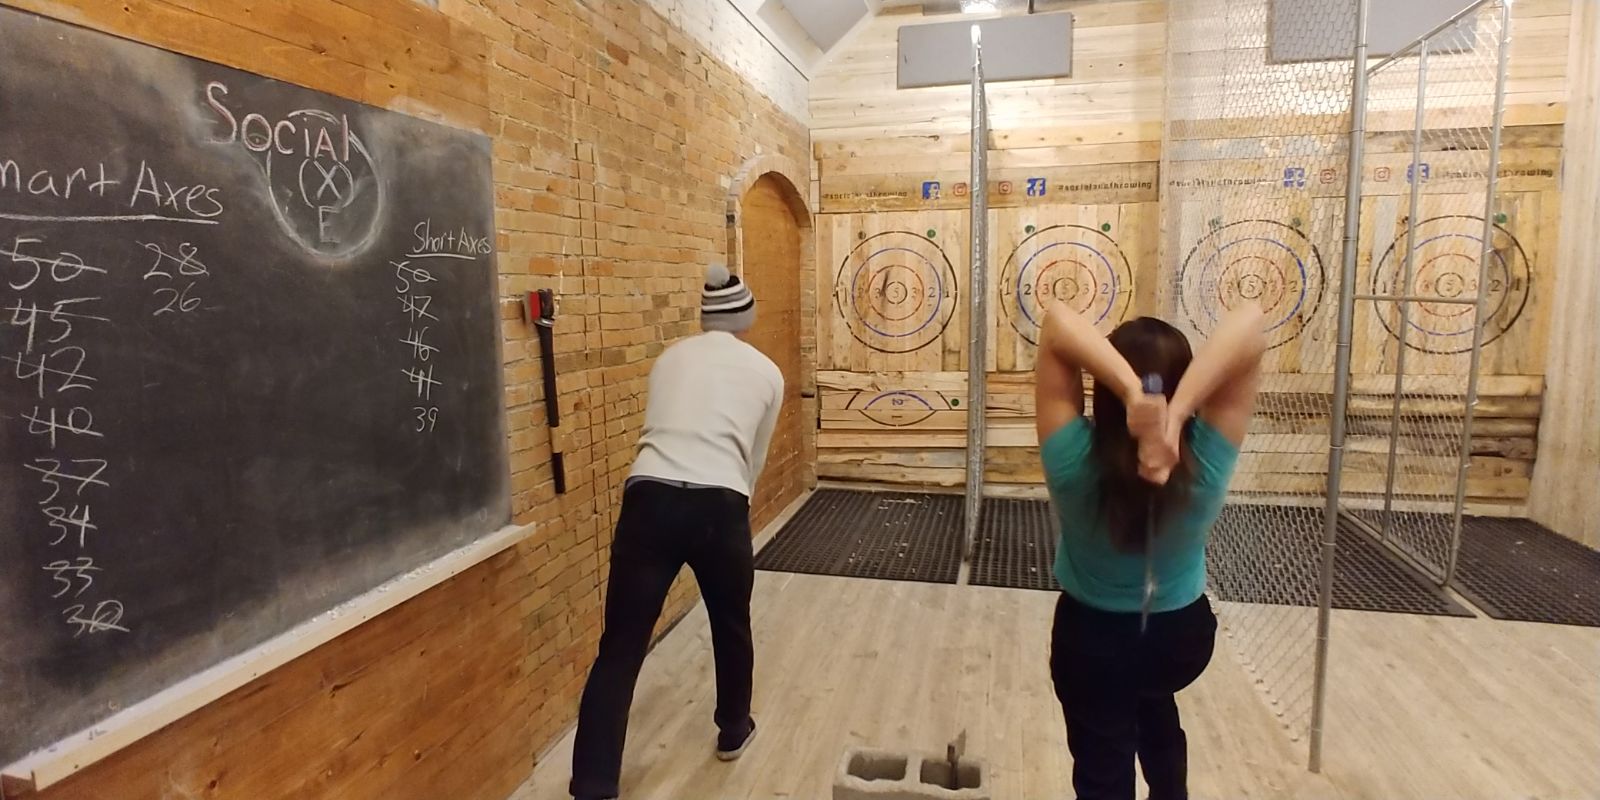 Fun things to do in Ogden after a day on the slopes includes a friendly game of axe throwing.